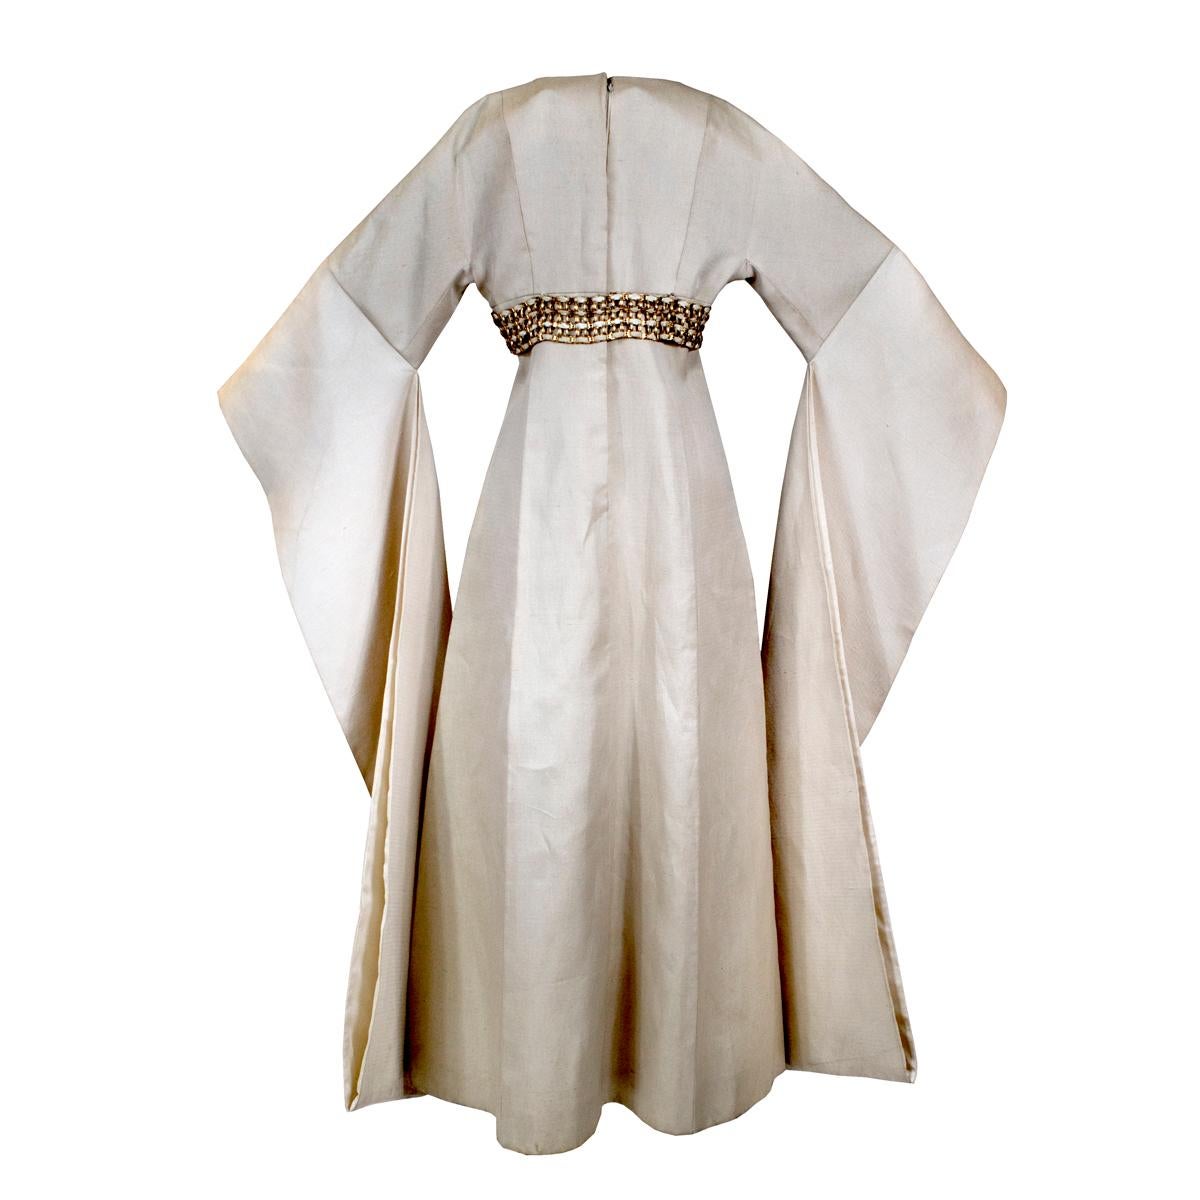 Kimono by Chester Weinberg c. 1965
Made from a rigid bone linen with a silk weave (natural beige color)
Organdy silk lining
Empire waist
Metal chain link / weave belt
Back zipper closure with top hook and eye

Size/measurements:
36